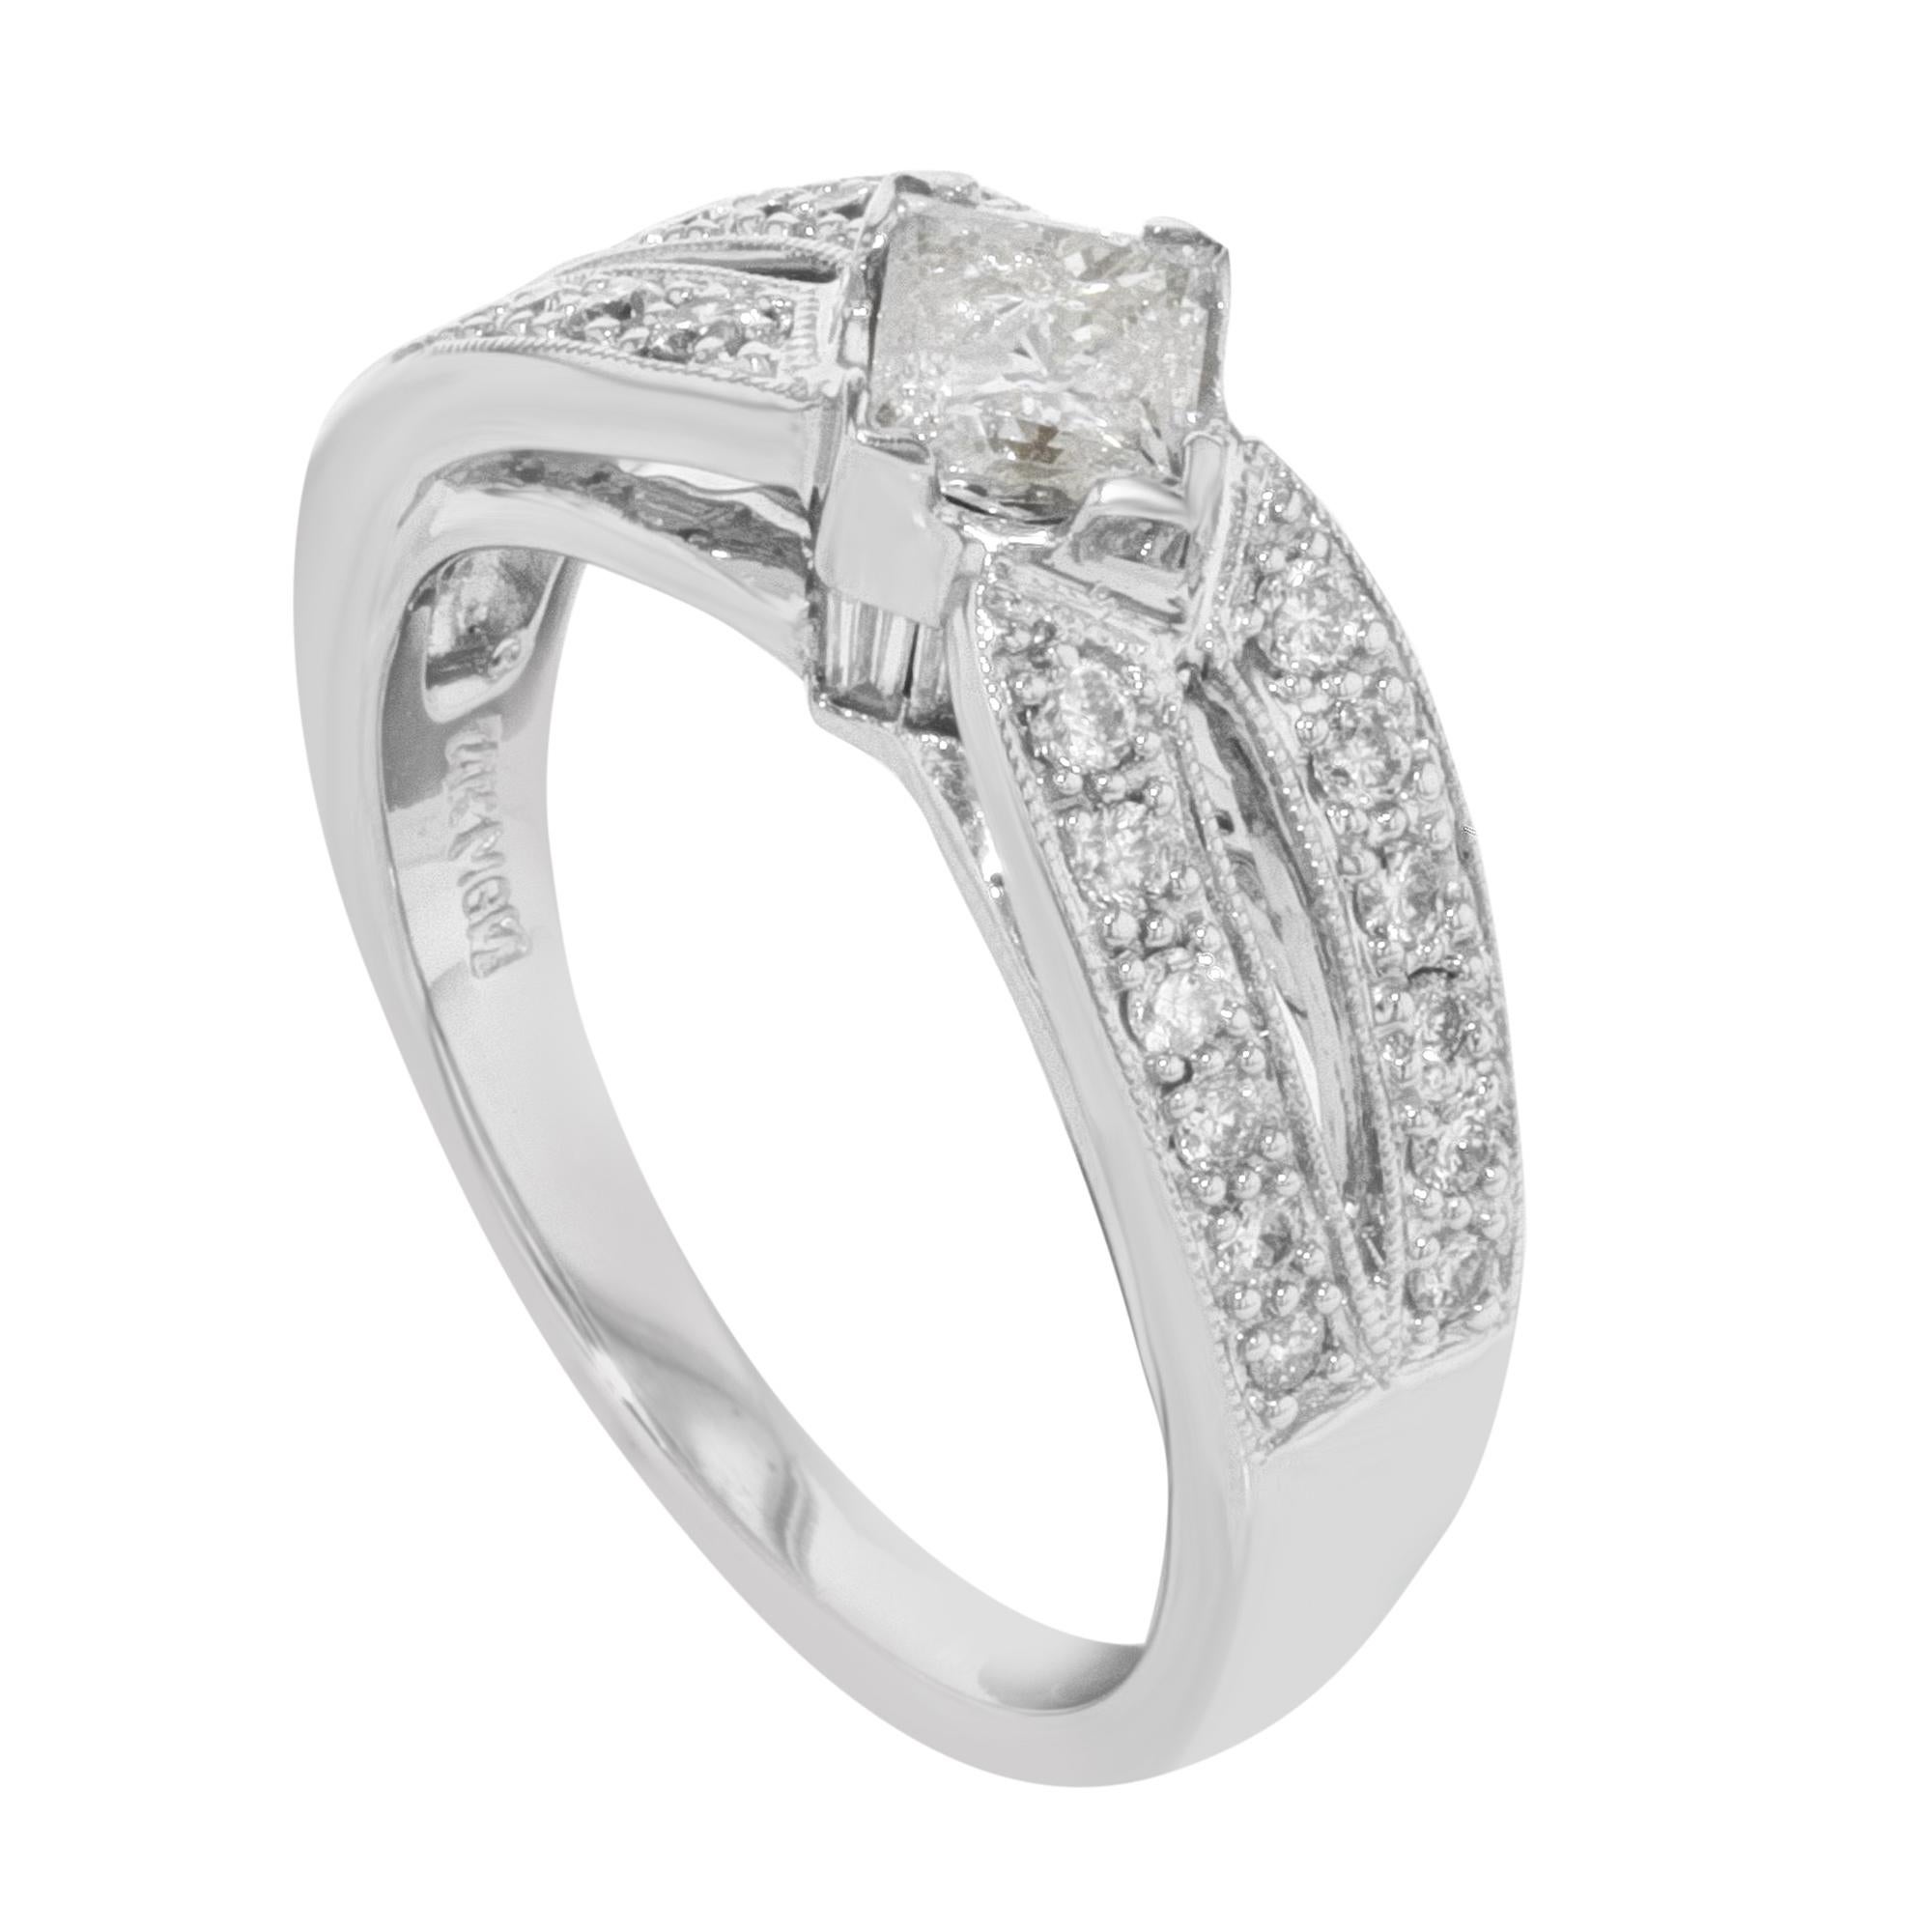 This beautiful diamond engagement ring is crafted in 14k white gold. It features a center princess cut diamond weighing approx. 0.62ct accented with 24 round cut diamonds weighing approx. 0.63ct. Total diamond weight: 1.25 carats. Ring size 7.5.